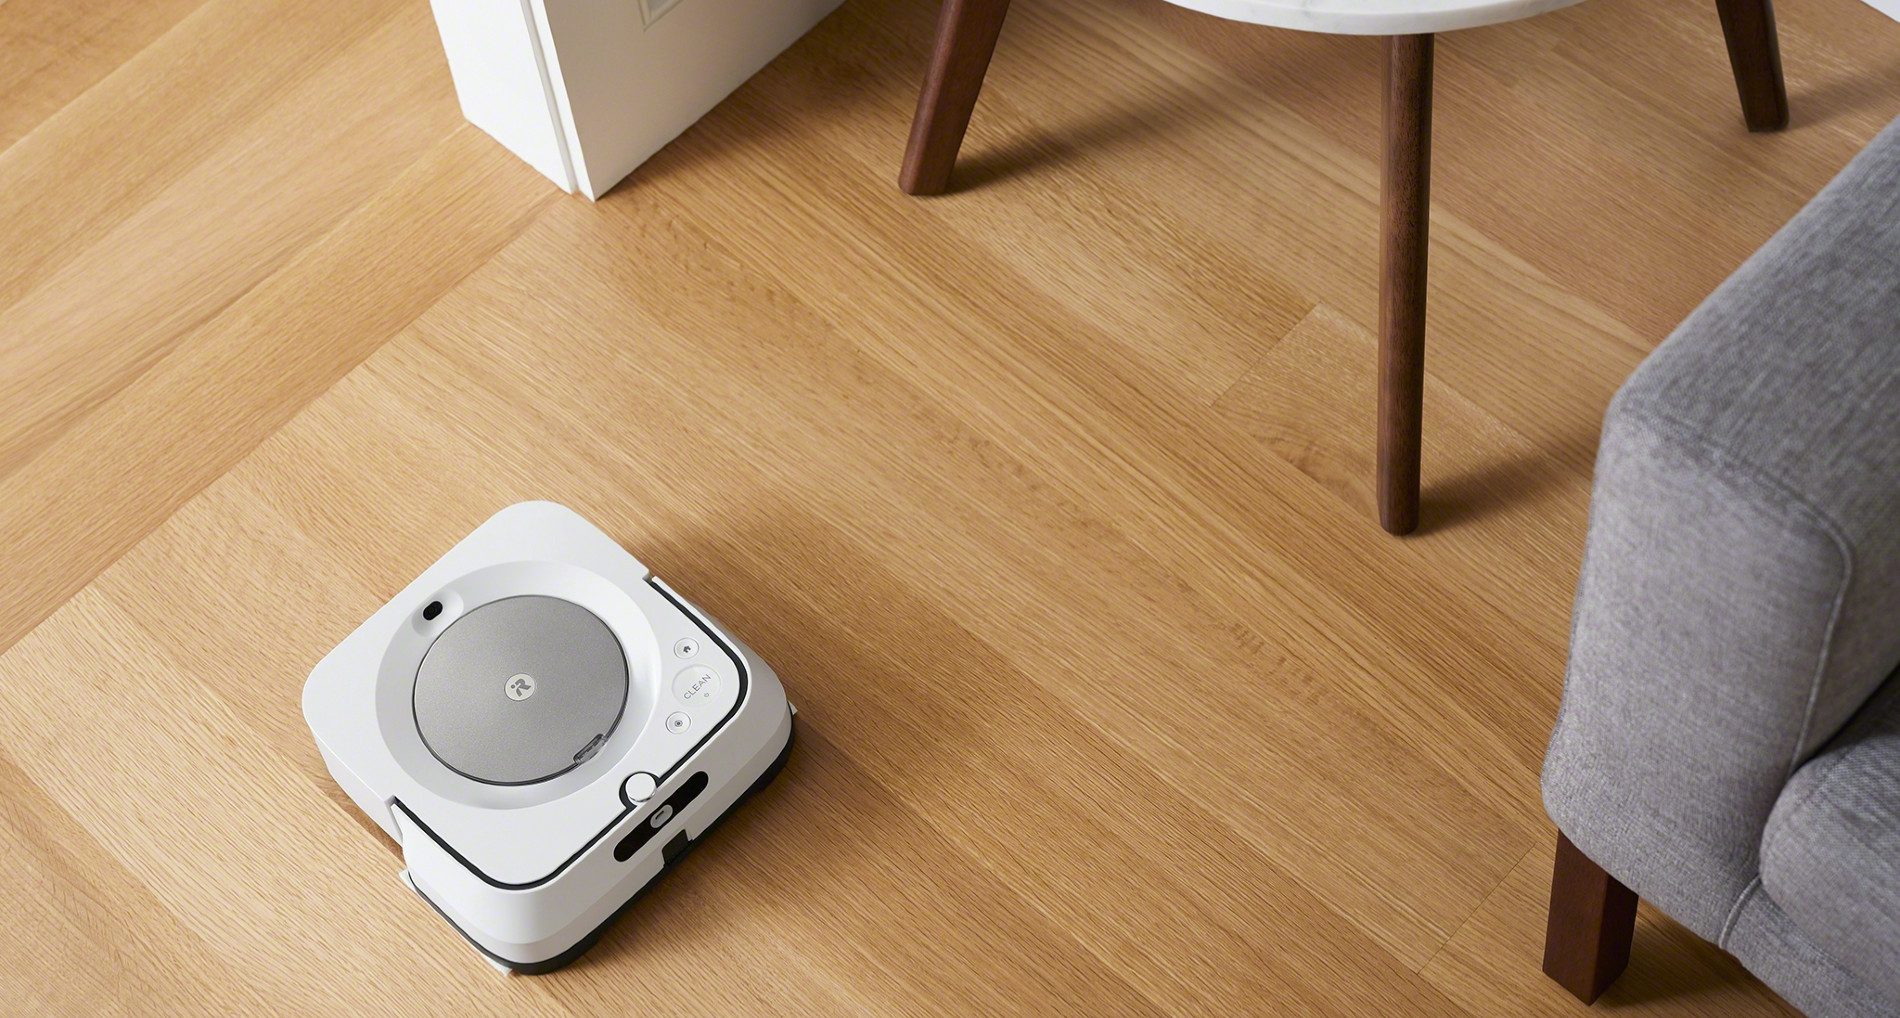 The future of clean is now with the iRobot Braava jet m6